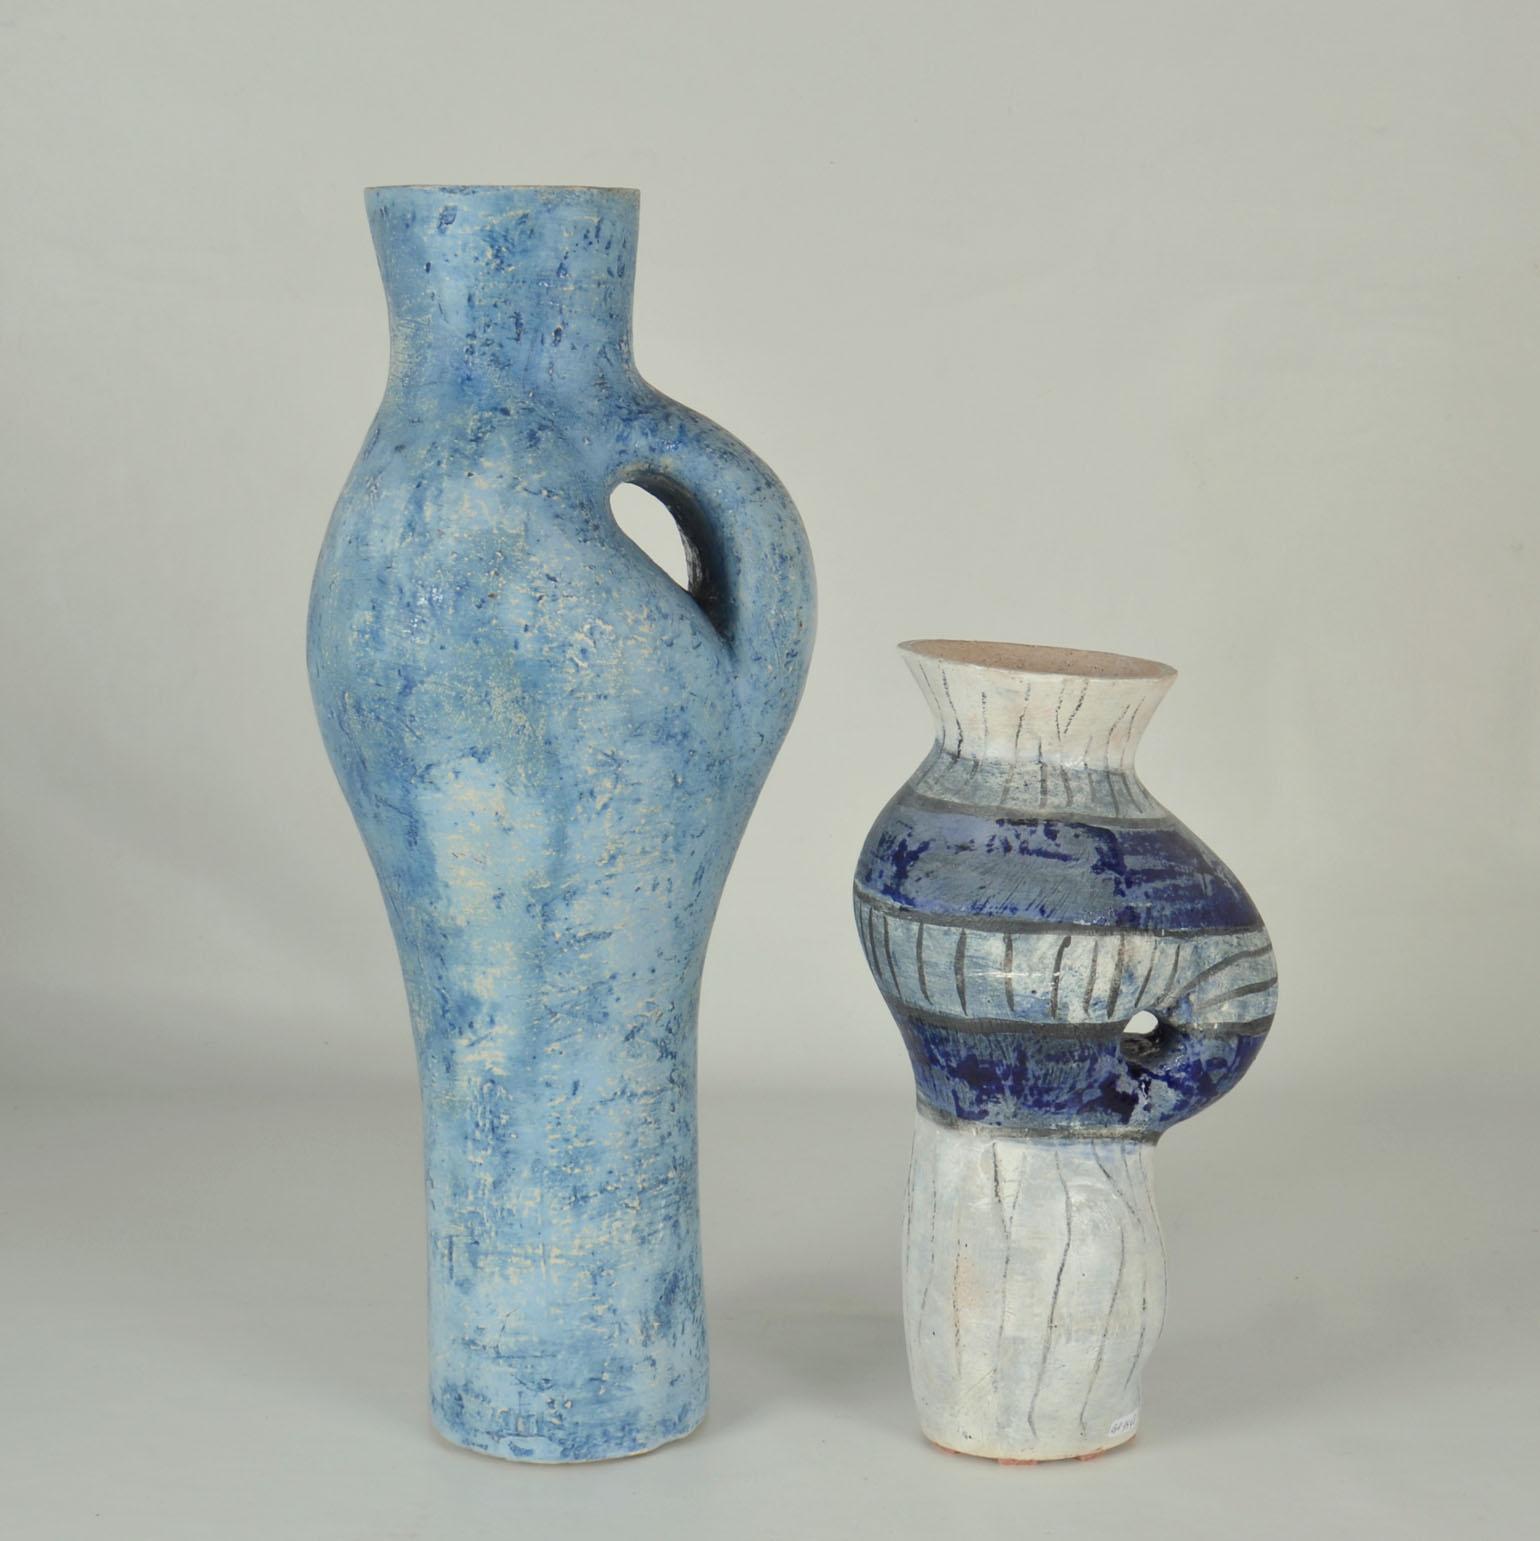 Sculptural organic hand formed vessel / vases by Willem Schalling. He made a number of vases from the late 1950s till the 1980s.
He lived and worked in Amsterdam and was an assistant to the sculptor Hildo Krop who executed ornamental details for